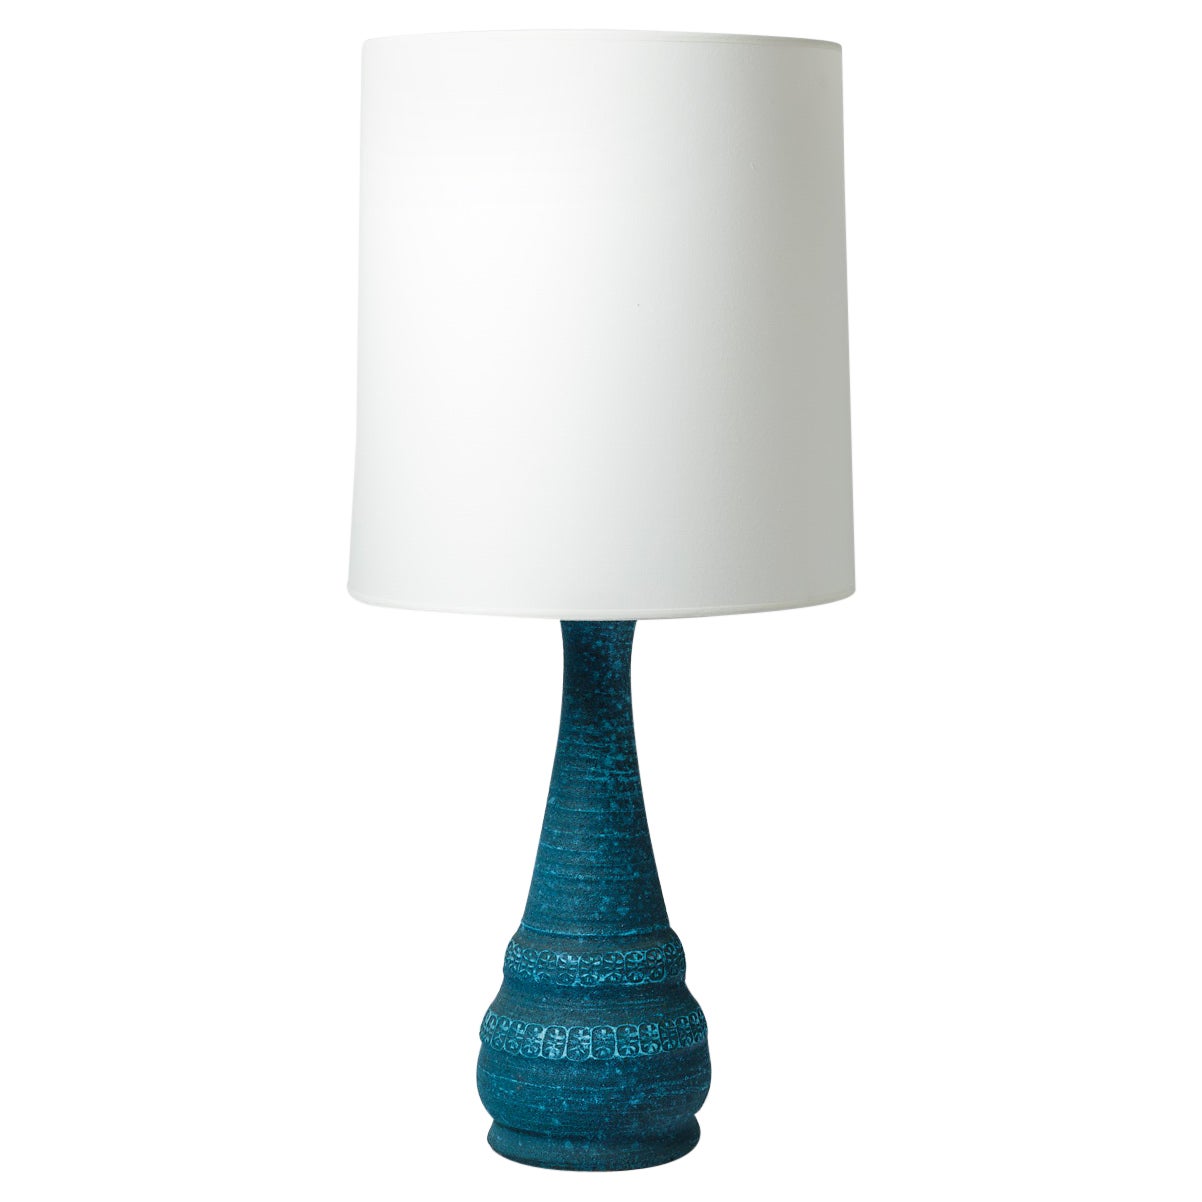 Ceramic Table Lamp by Accolay Potters, circa 1960-1970 For Sale